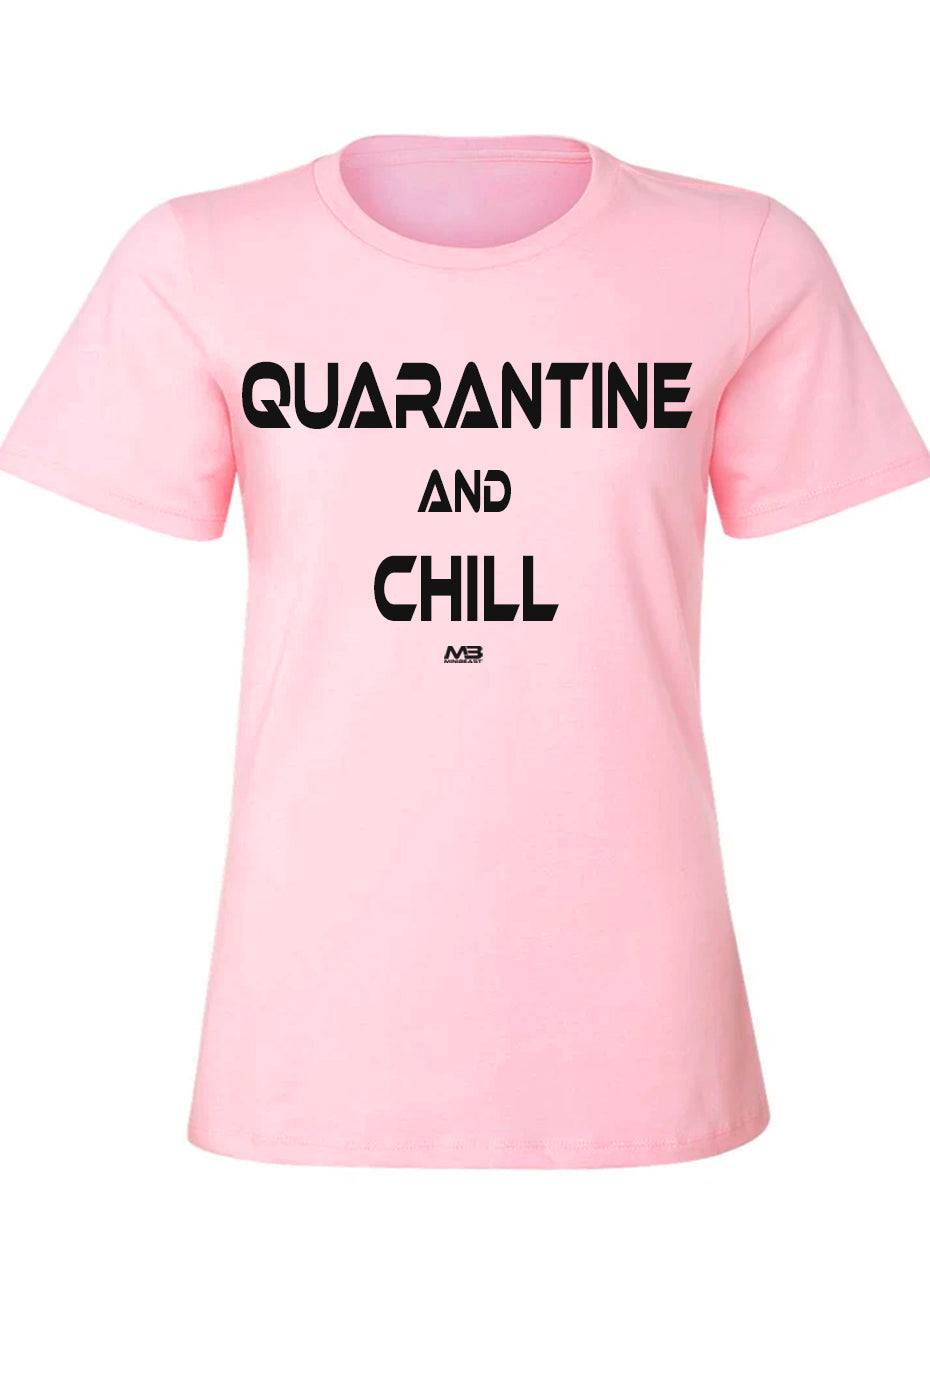 Women's "Quarantine And Chill" Fitted Tee